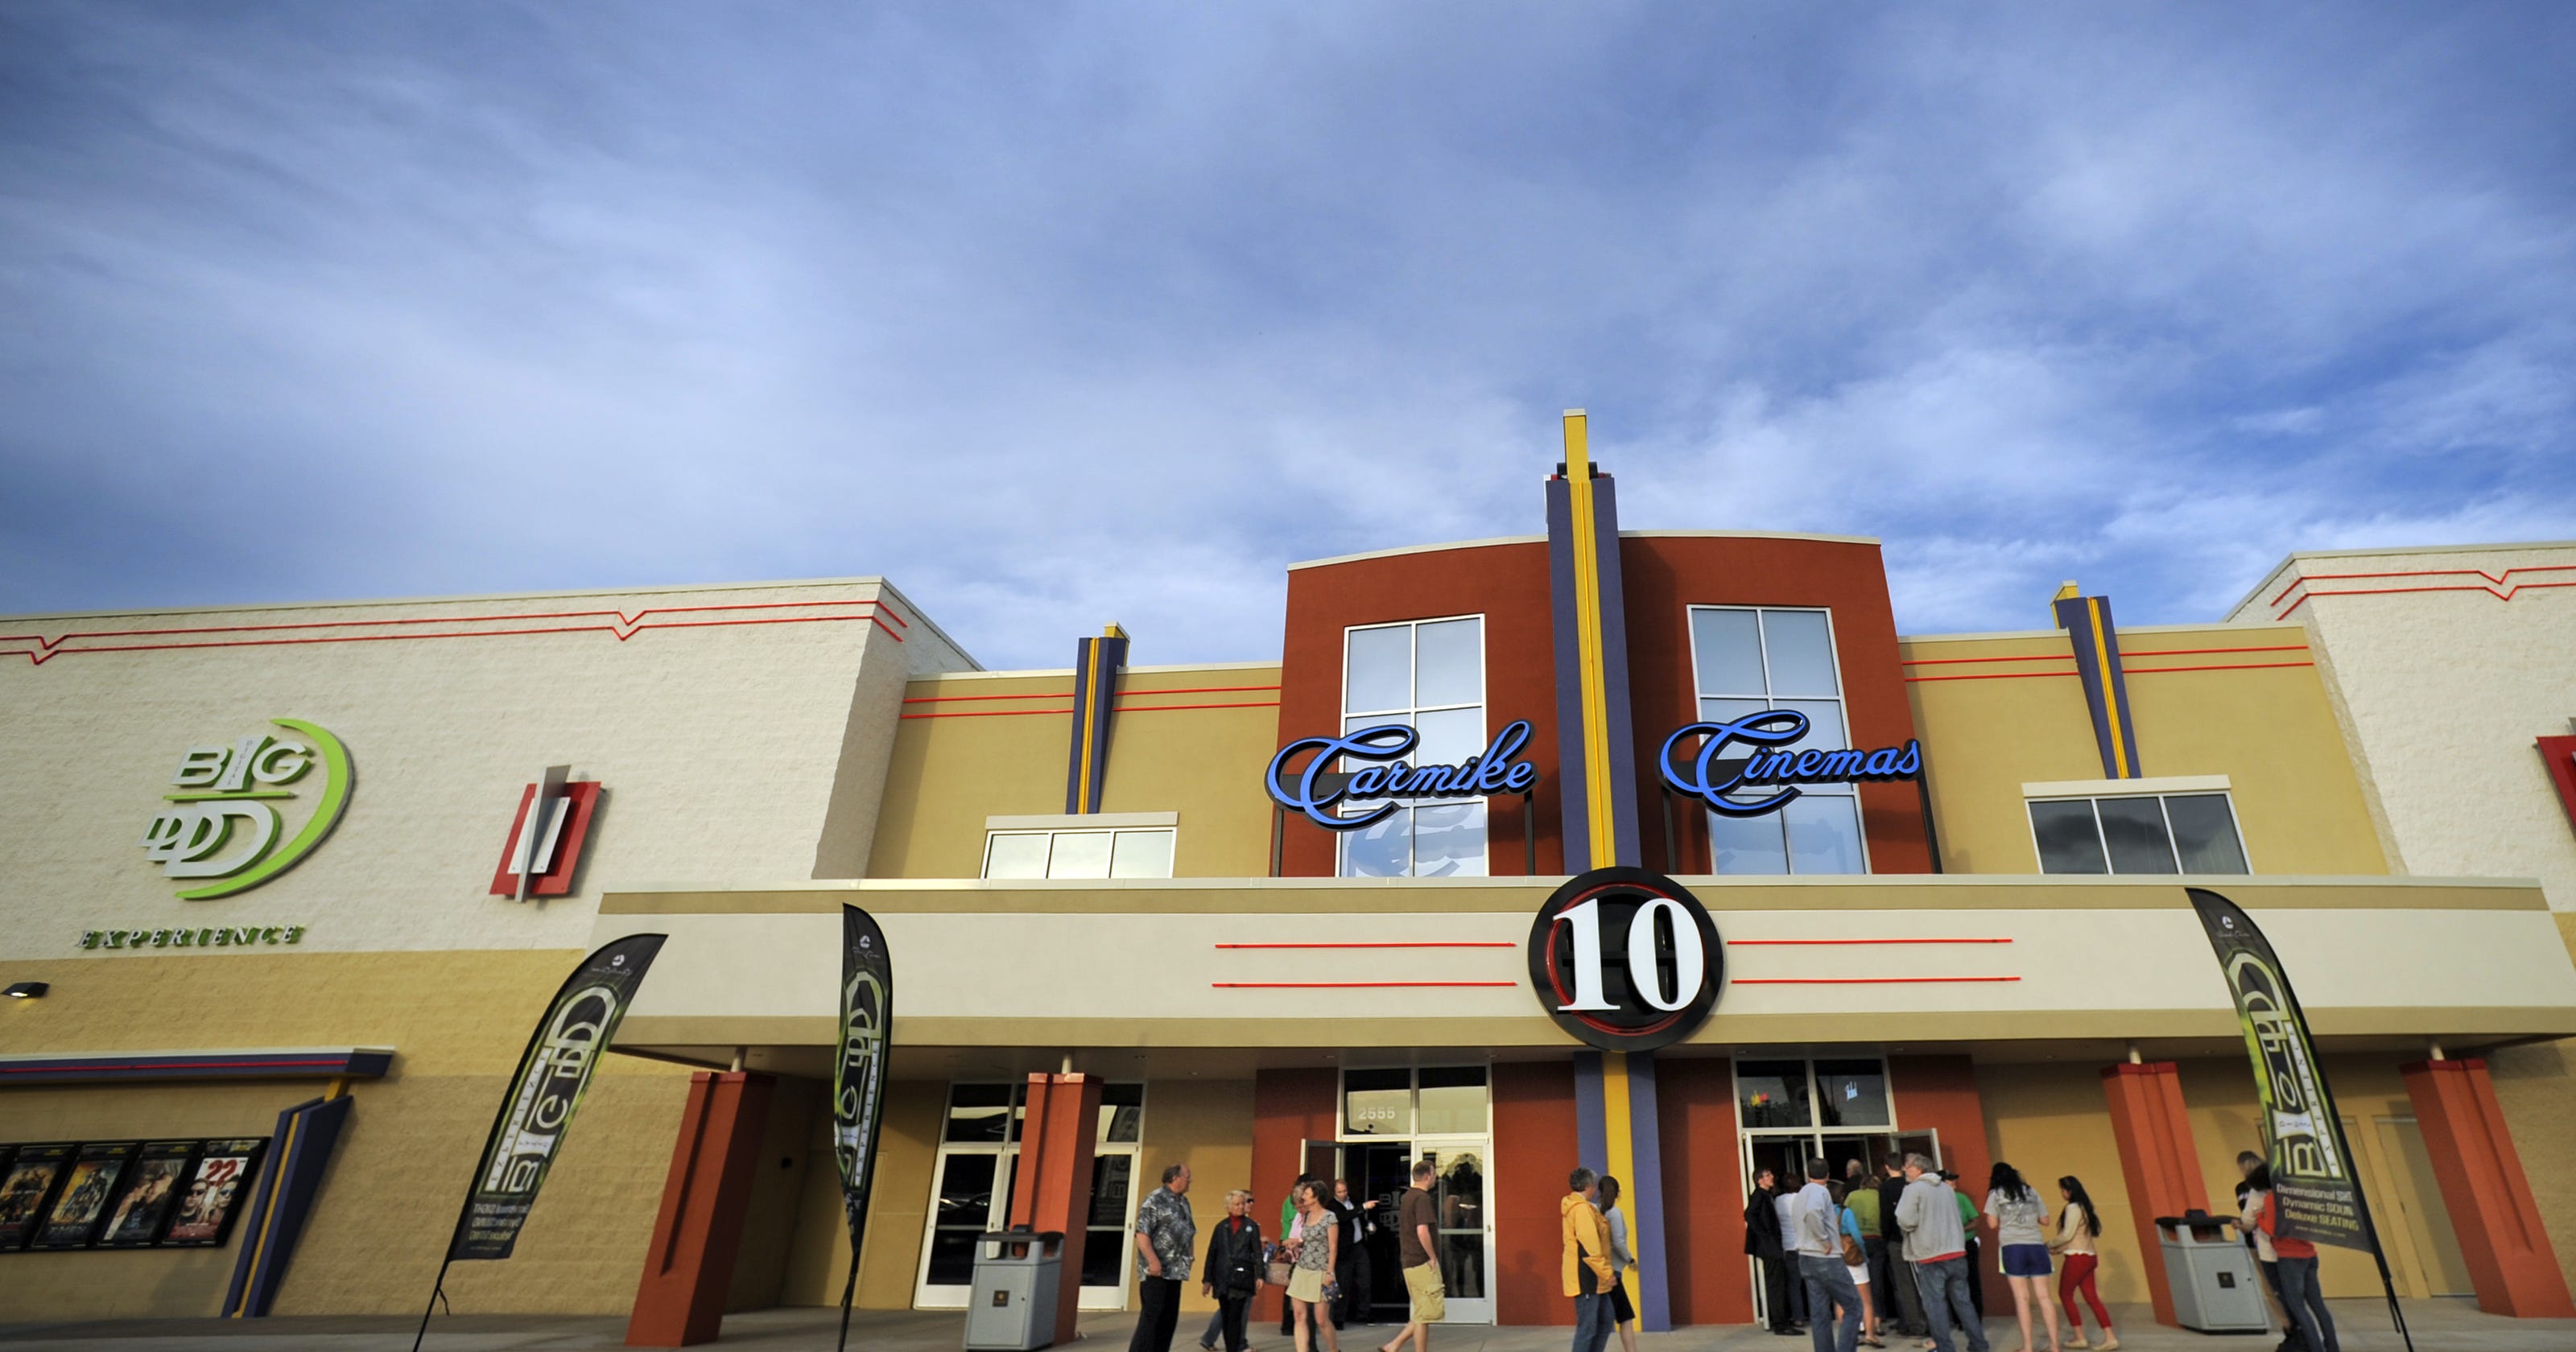 Are New Restaurants Planned Near The Carmike Manitowoc 10 Theater